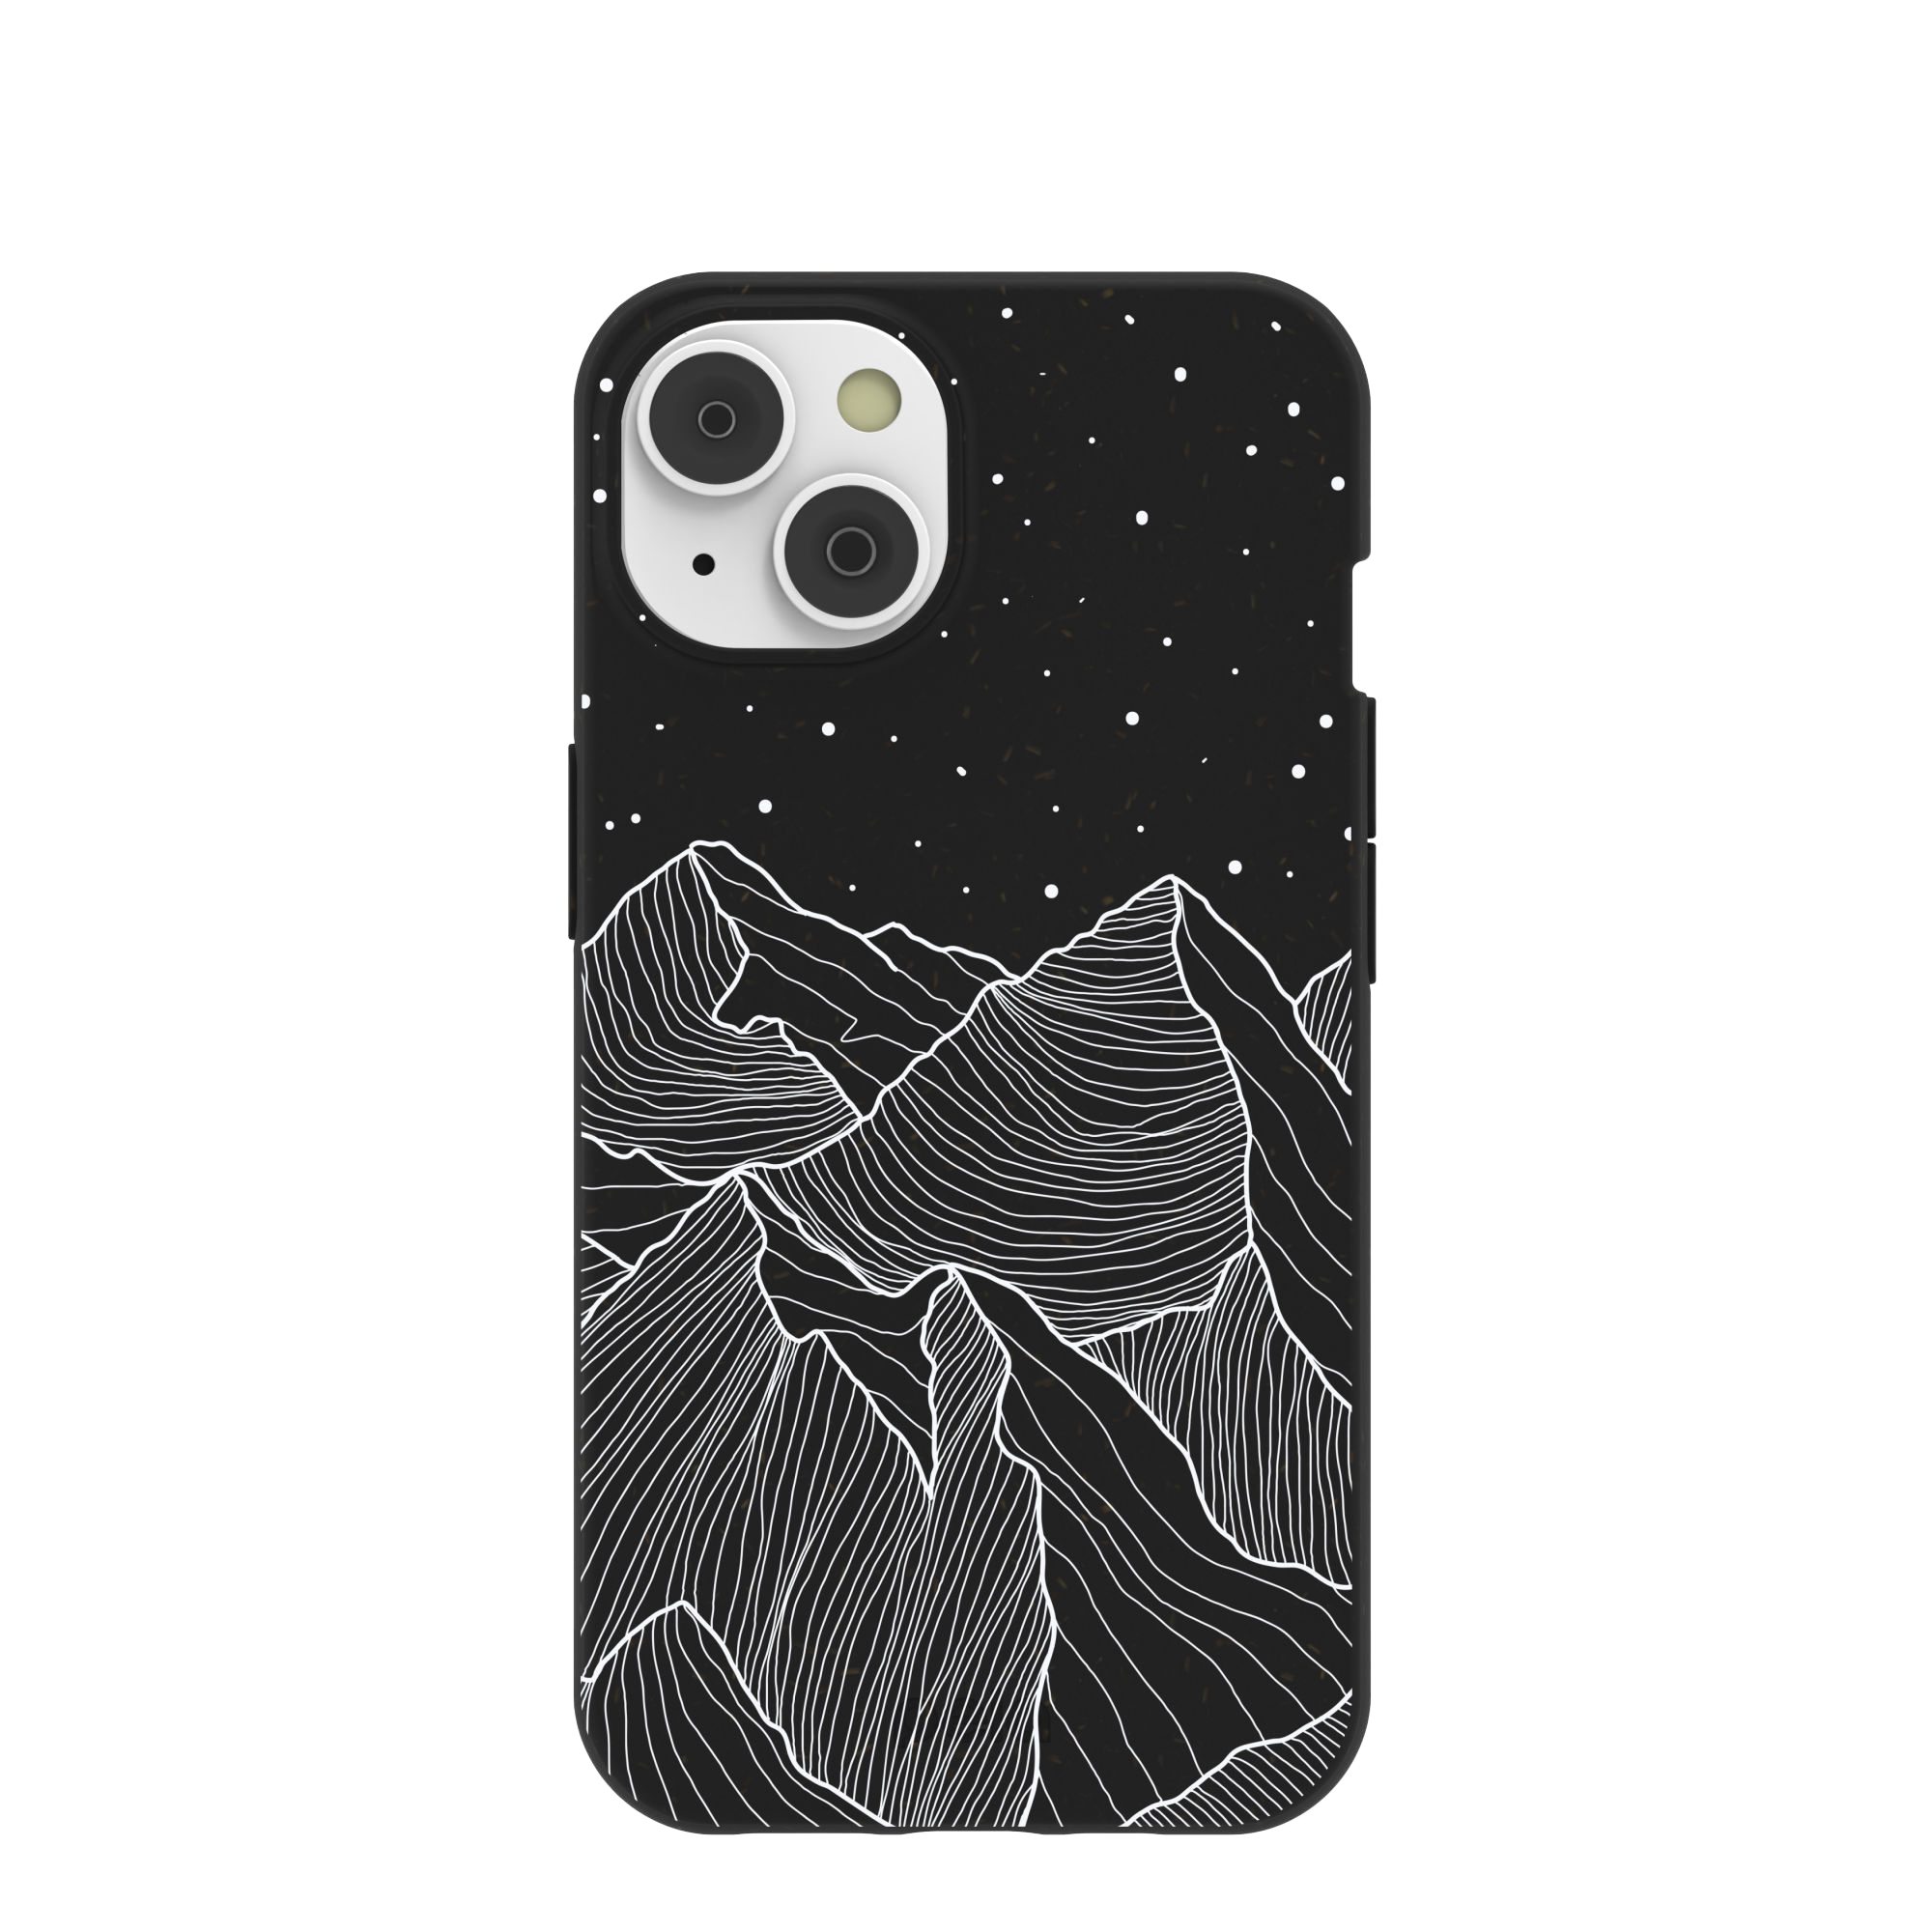 Phone case with a black and white mountain design and starry night sky.